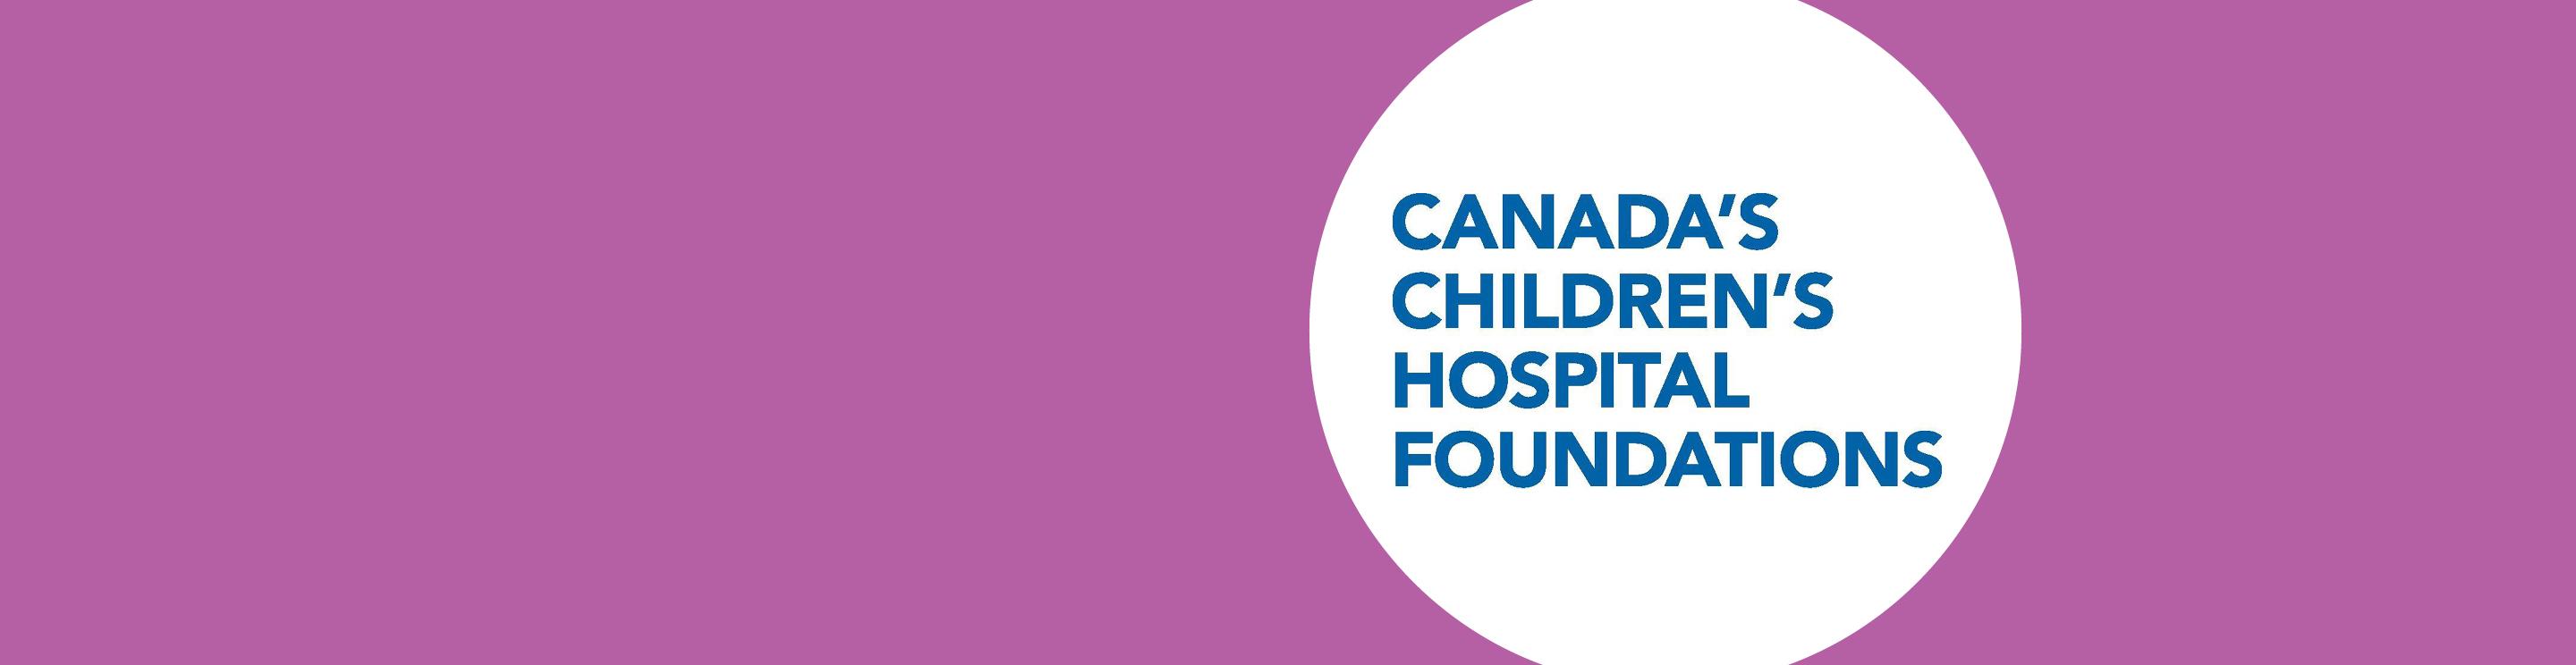 Canada's Children's Hospital Foundations banner image